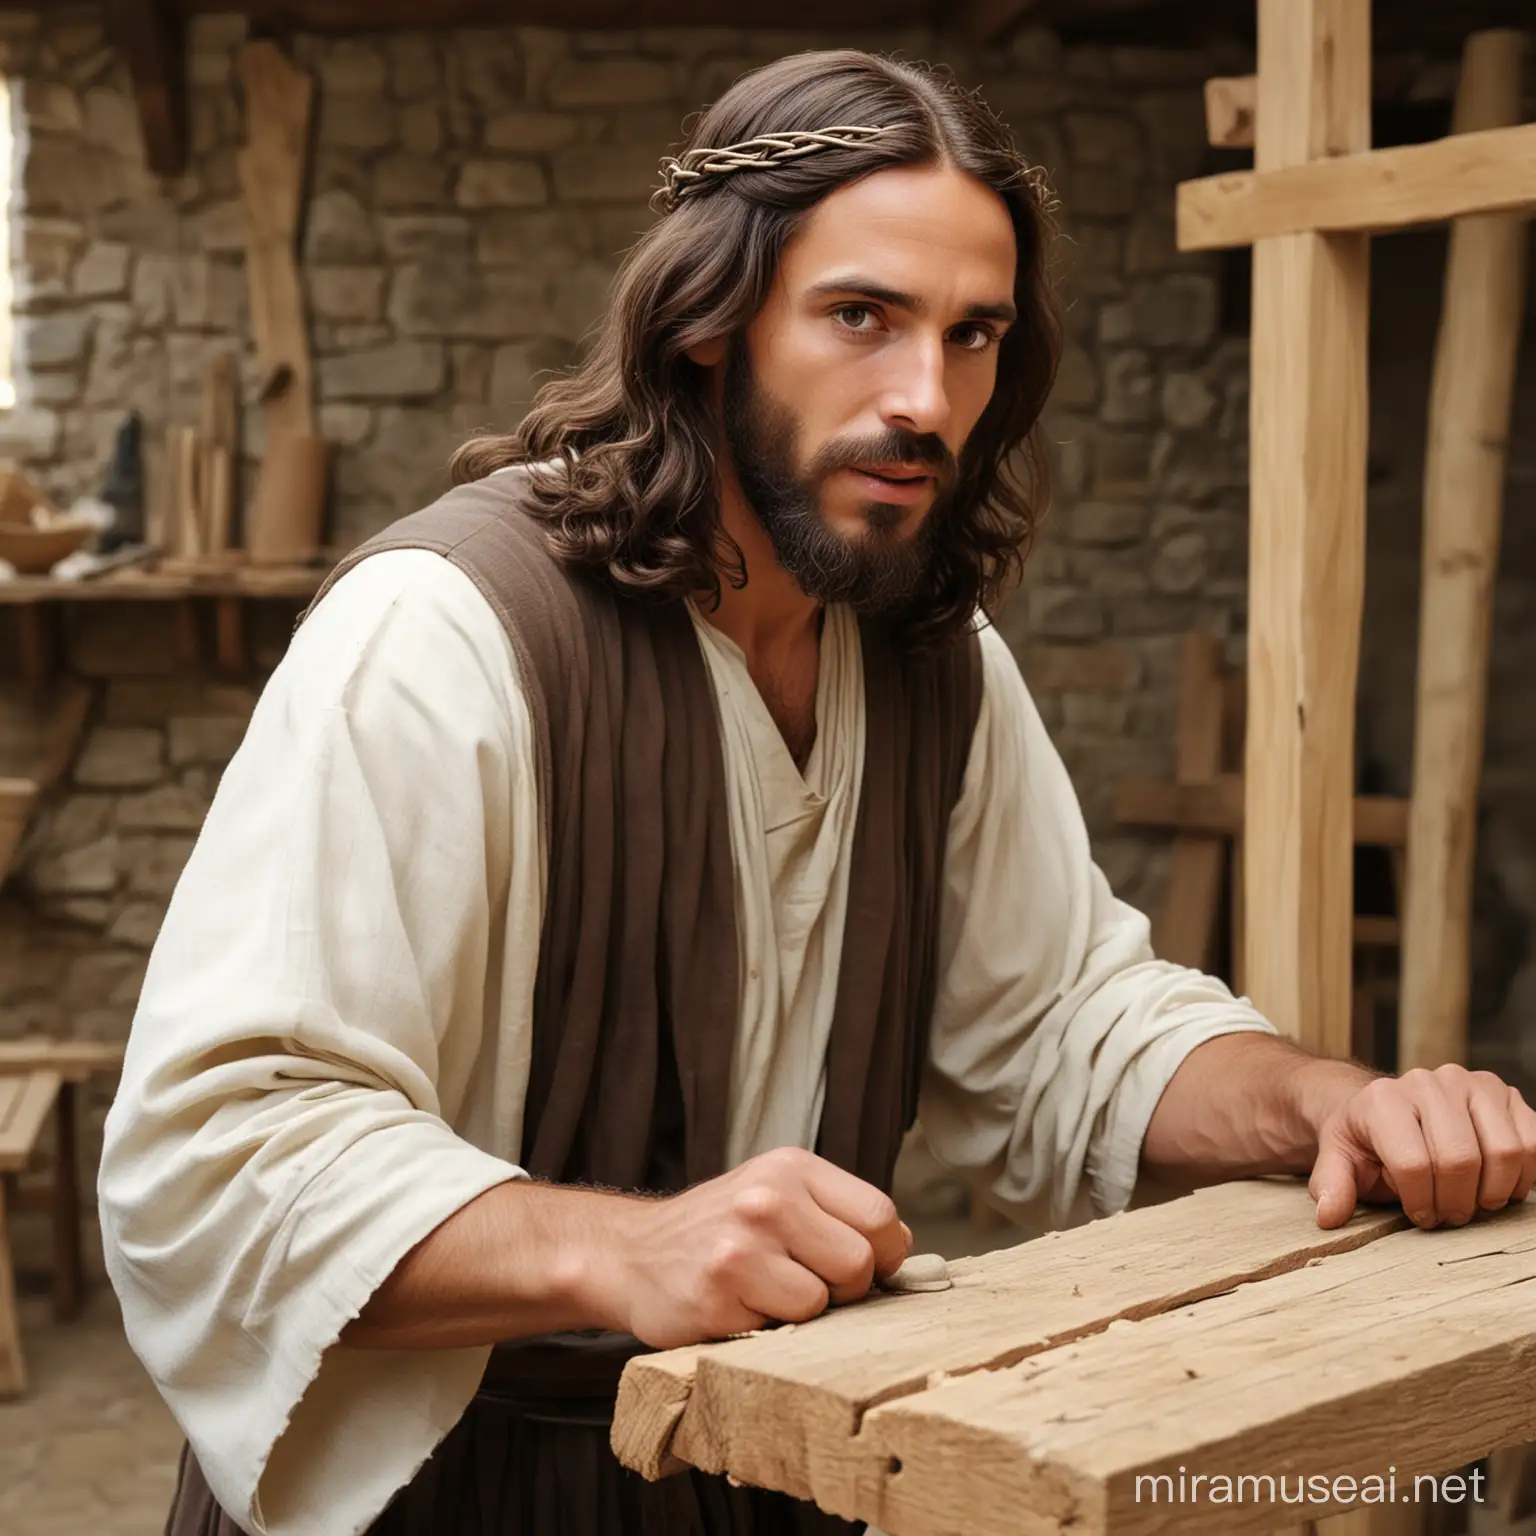 Jesus as a jew 2000 years back working as a carpenter